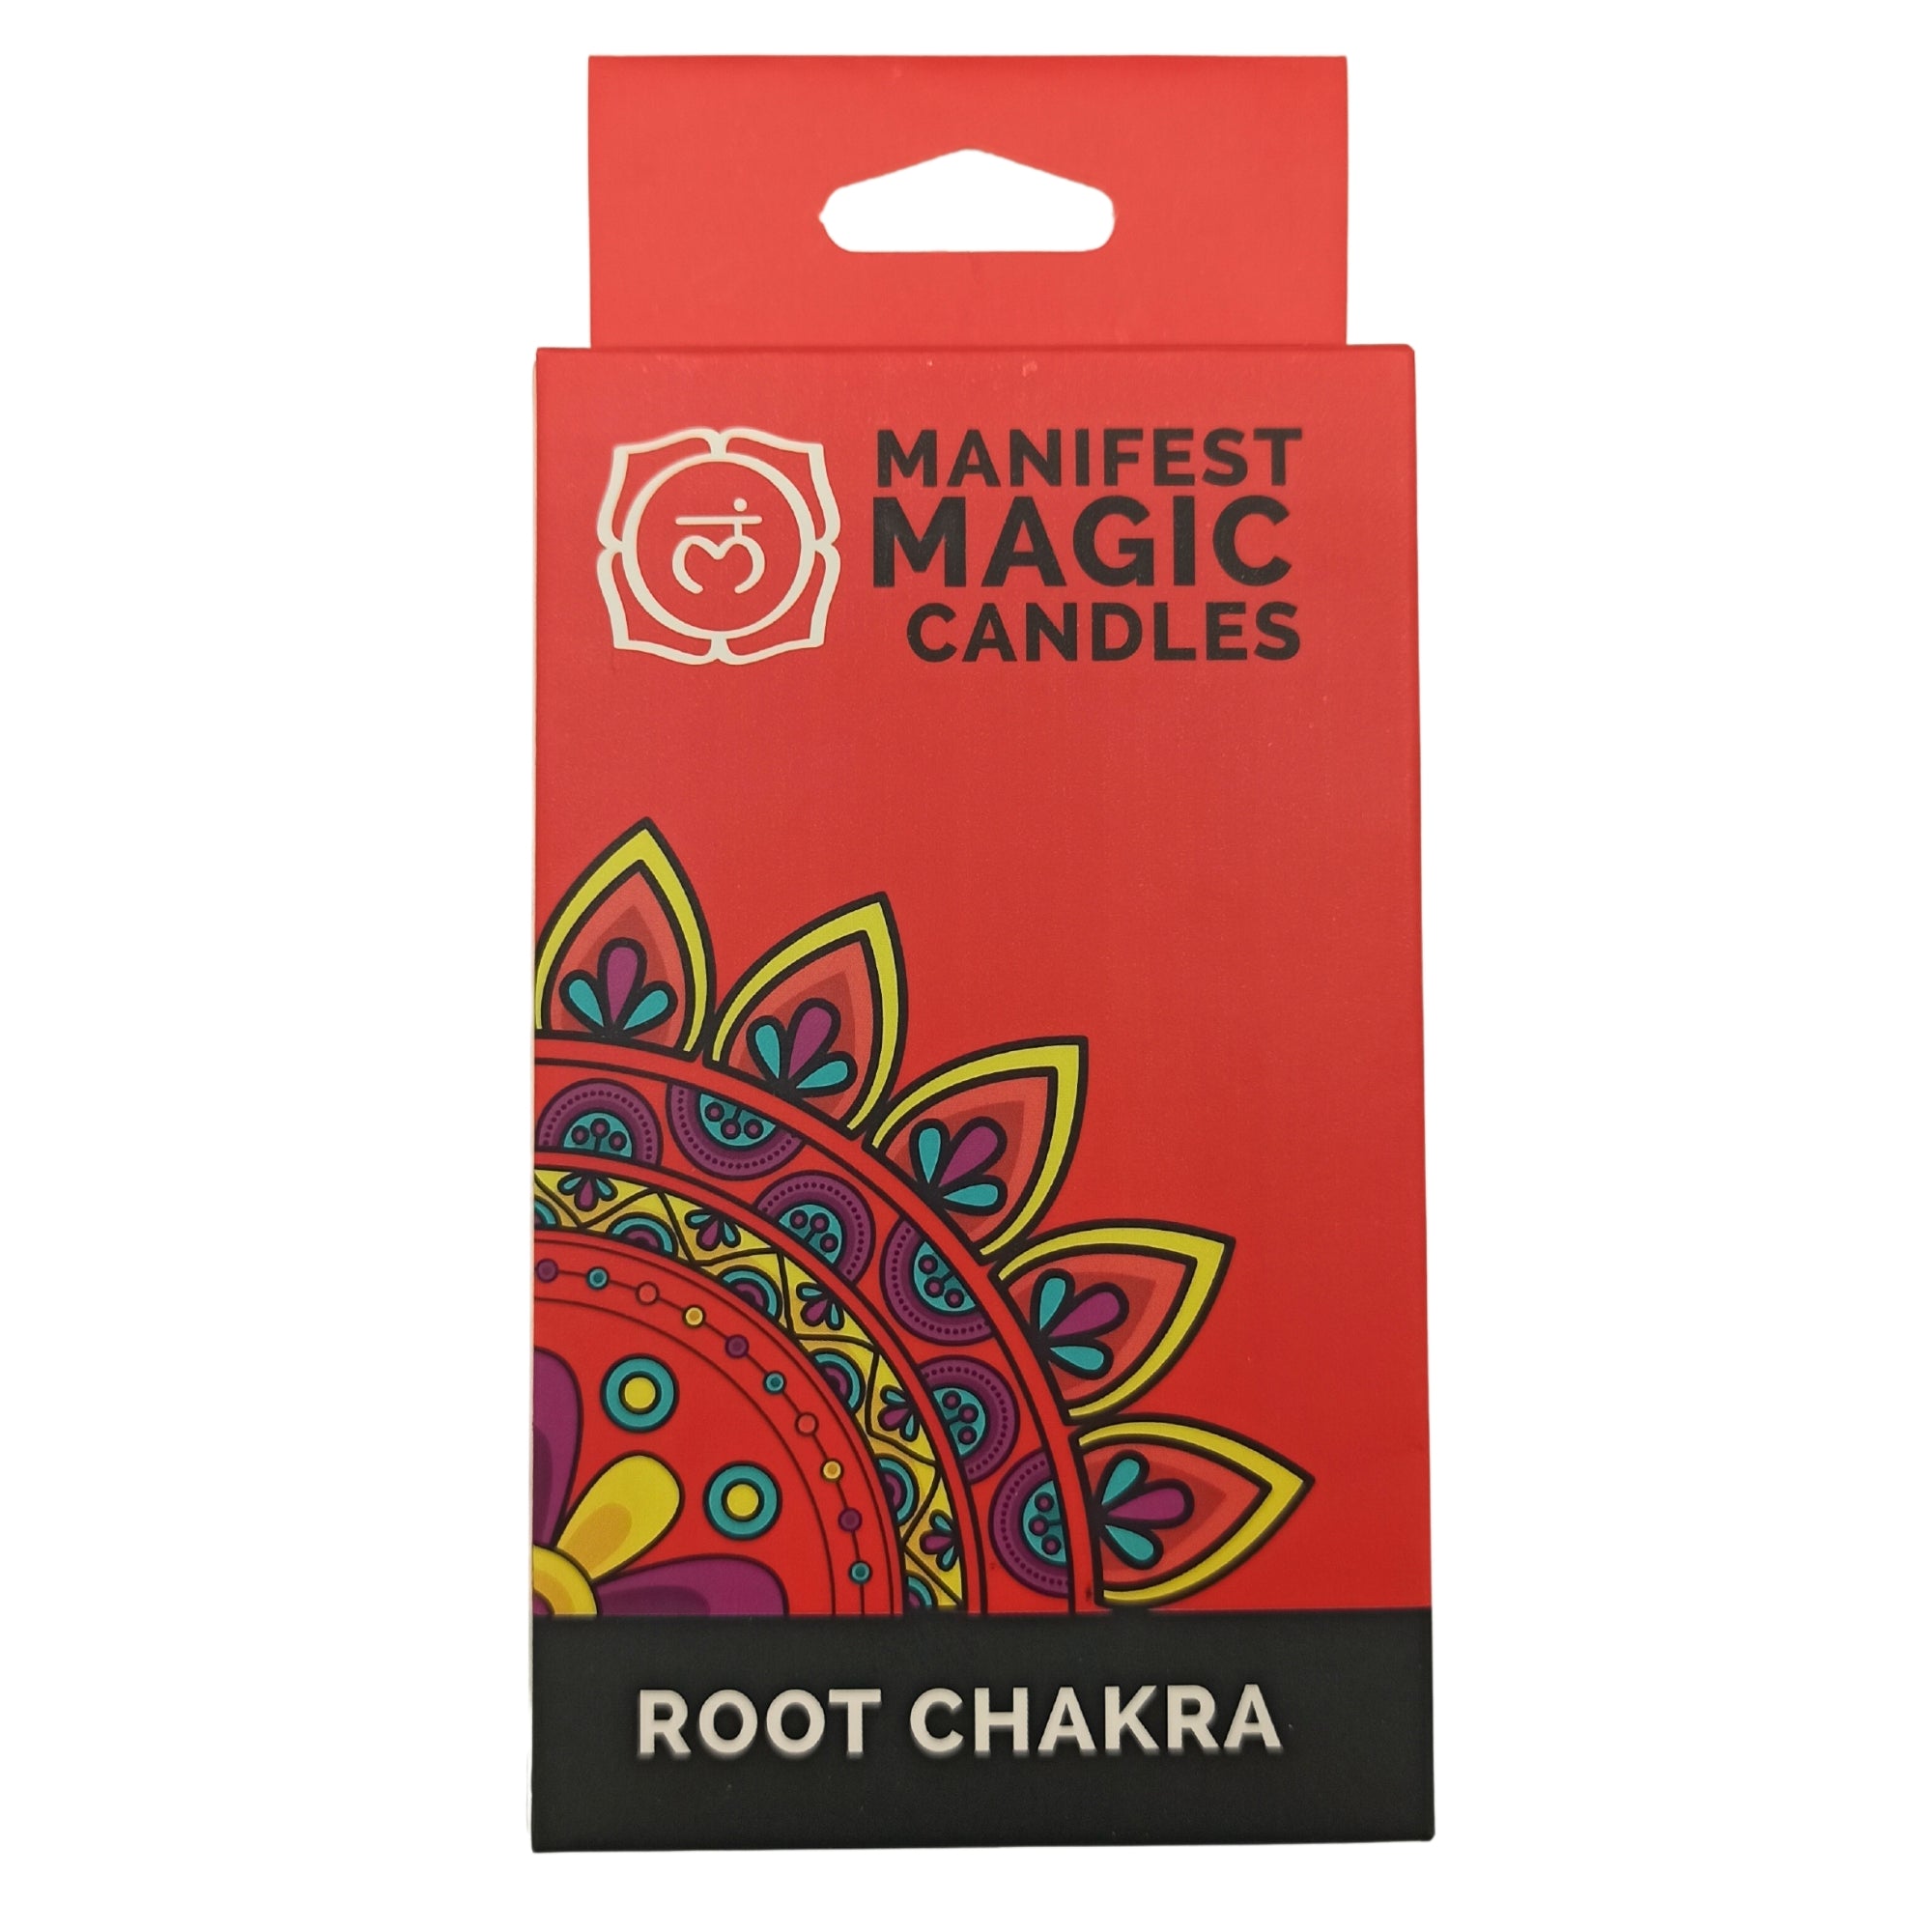 View Manifest Magic Candles pack of 12 Red Root Chakra information